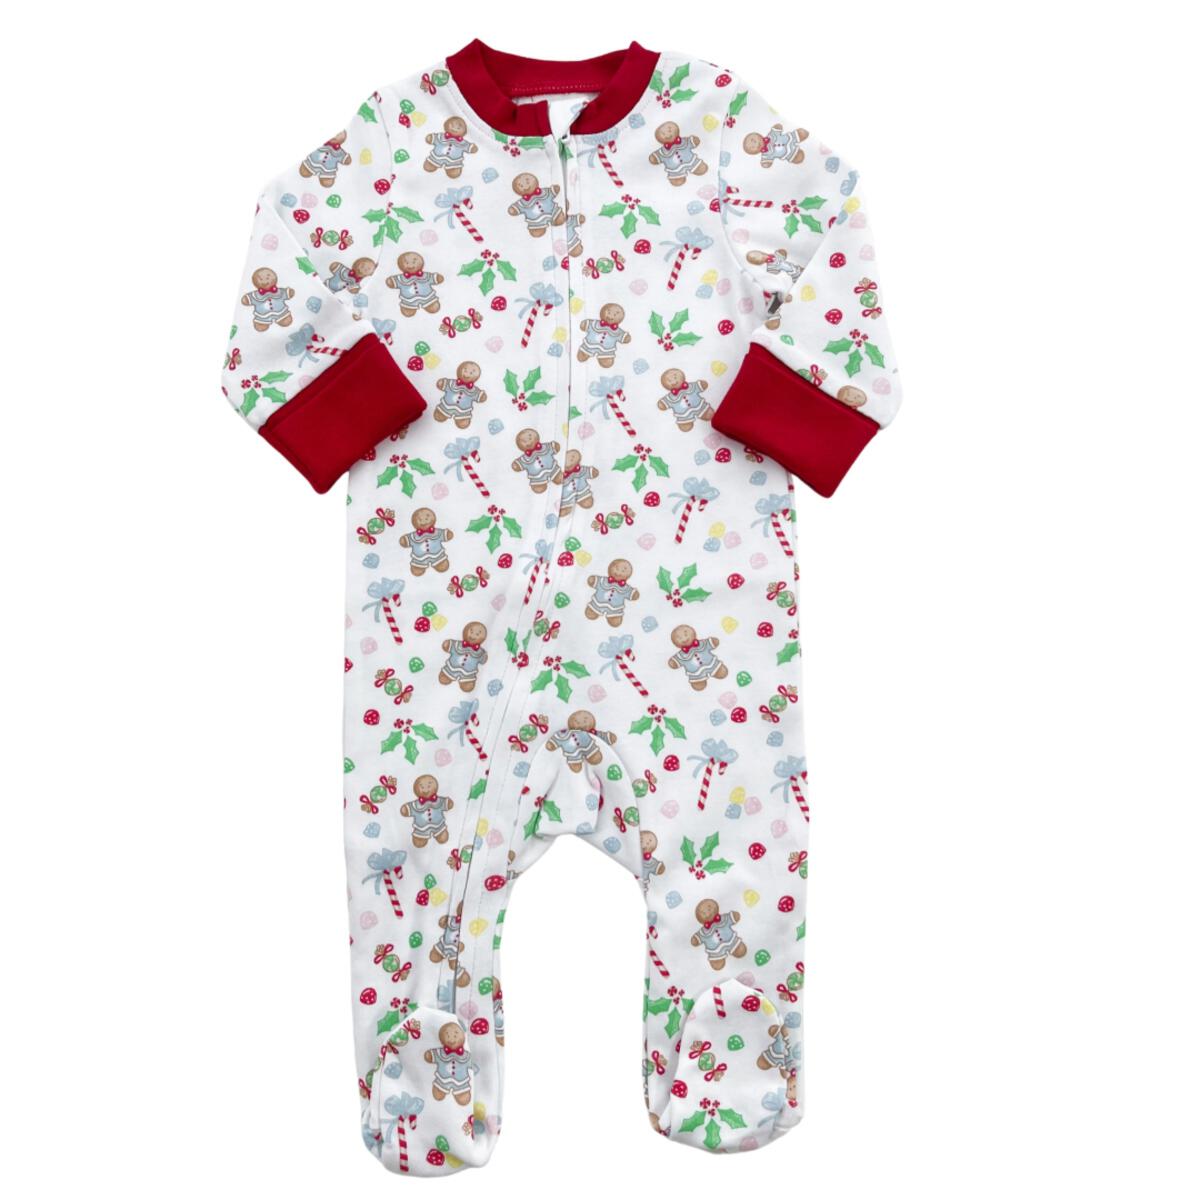 A baby's Chickie Collective Boy Gingerbread Footie Pajama with christmas decorations.